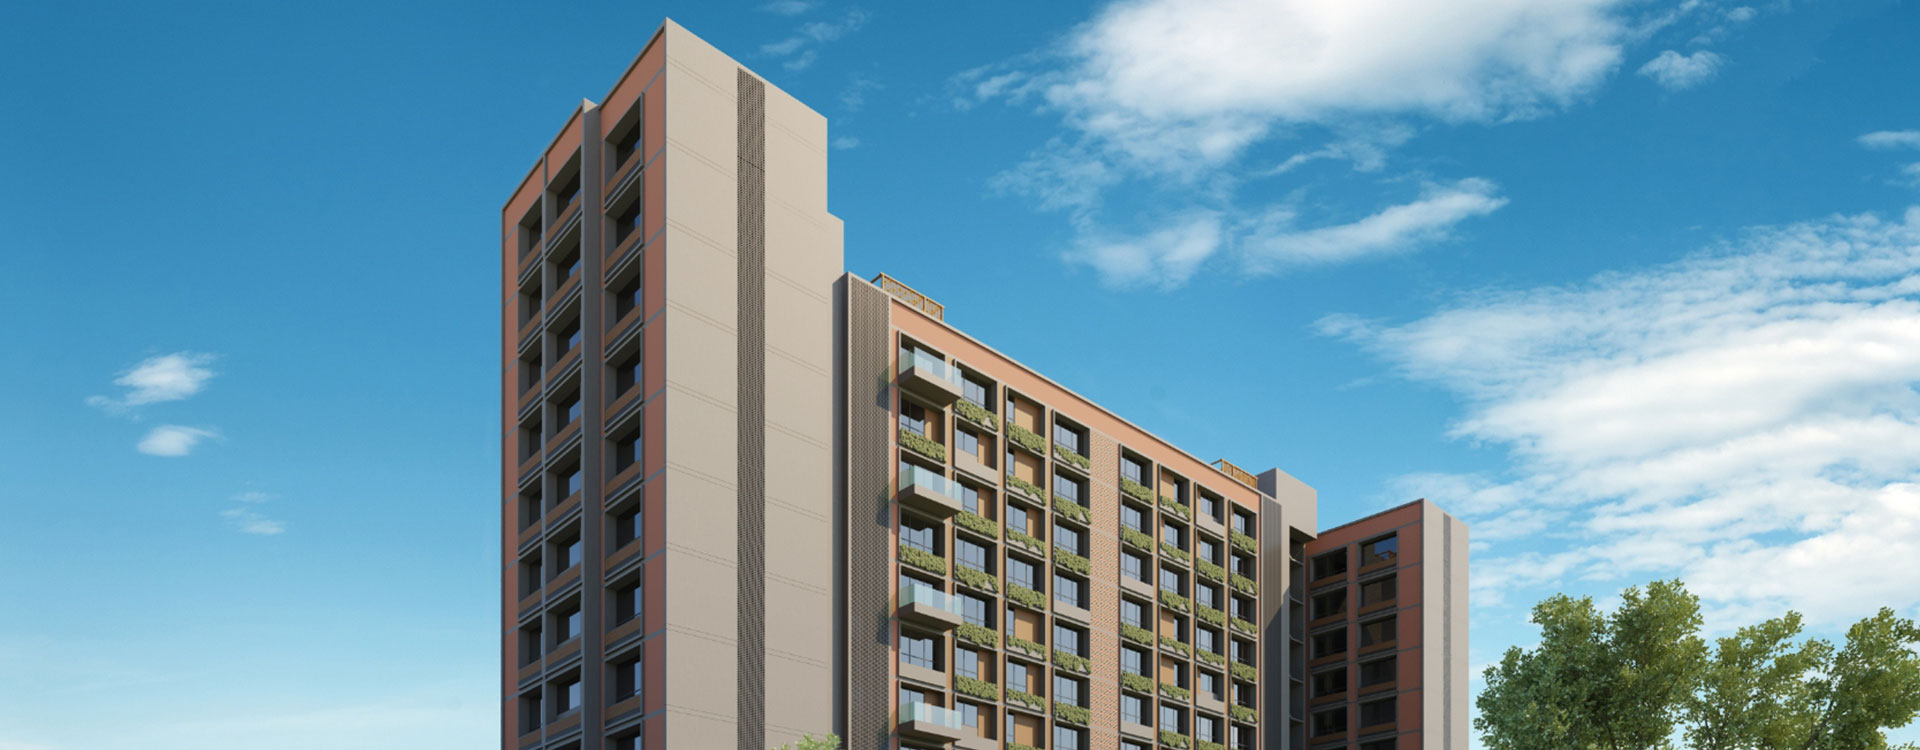 Zion Windfield 4BHK Apartments